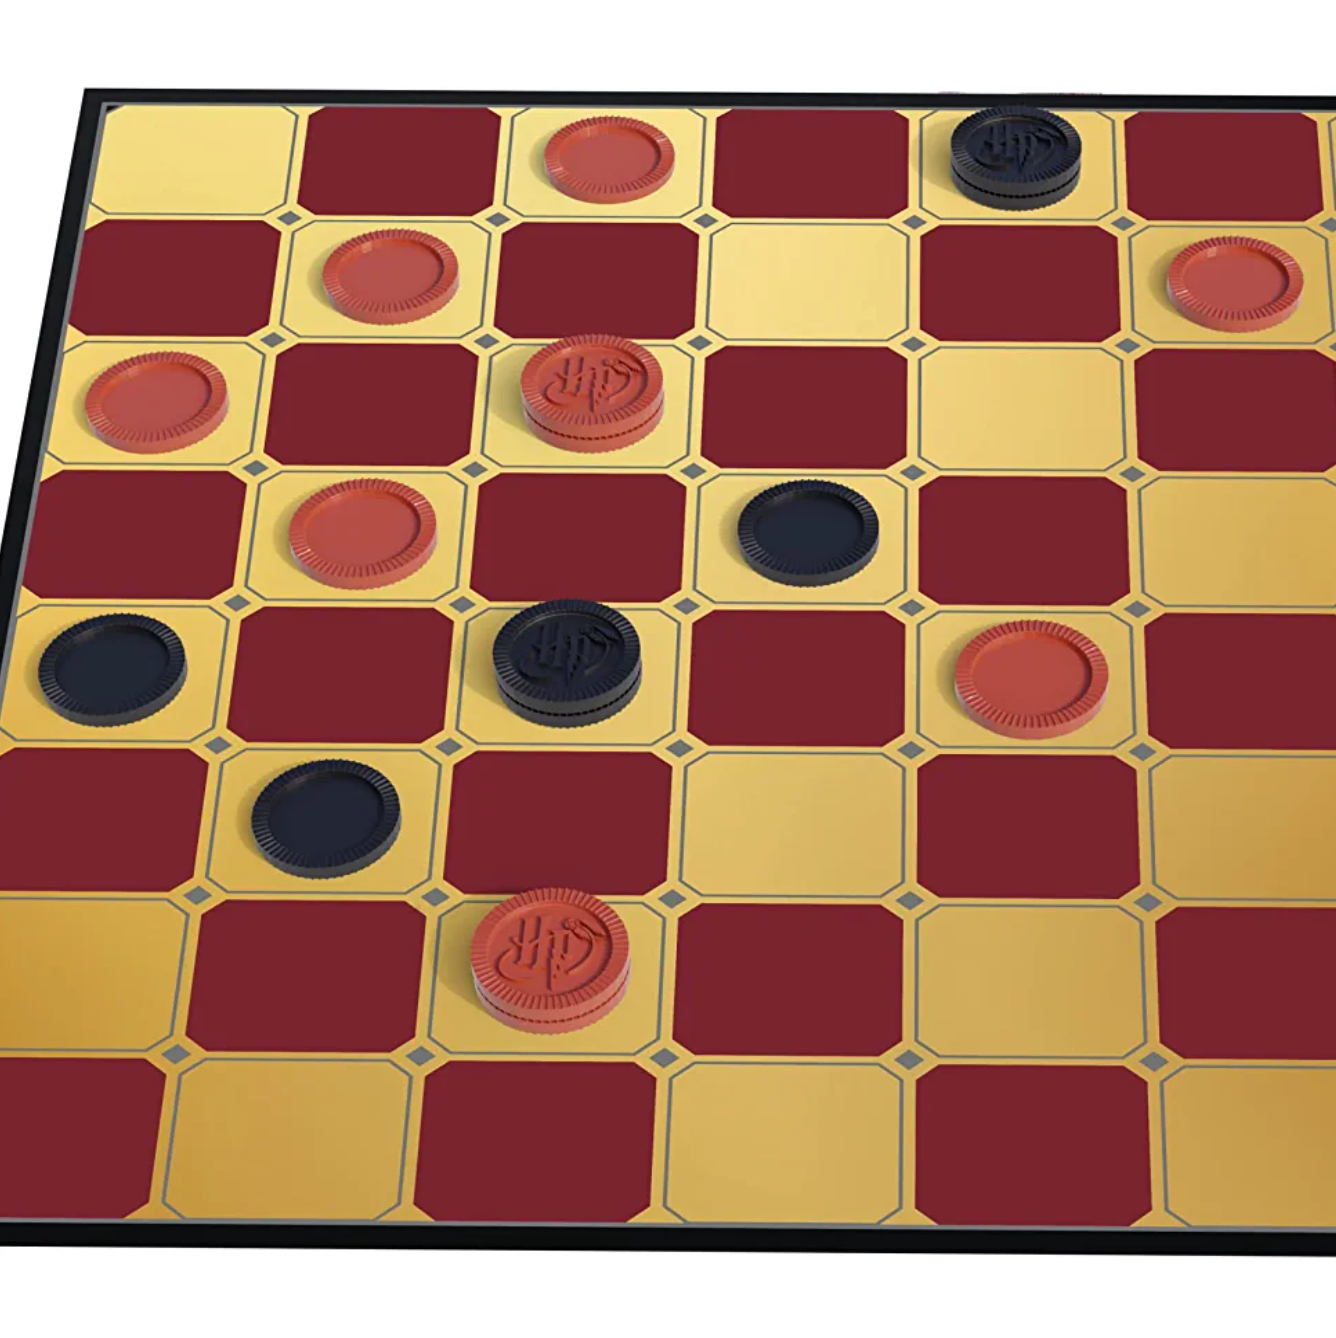 Harry Potter Checkers